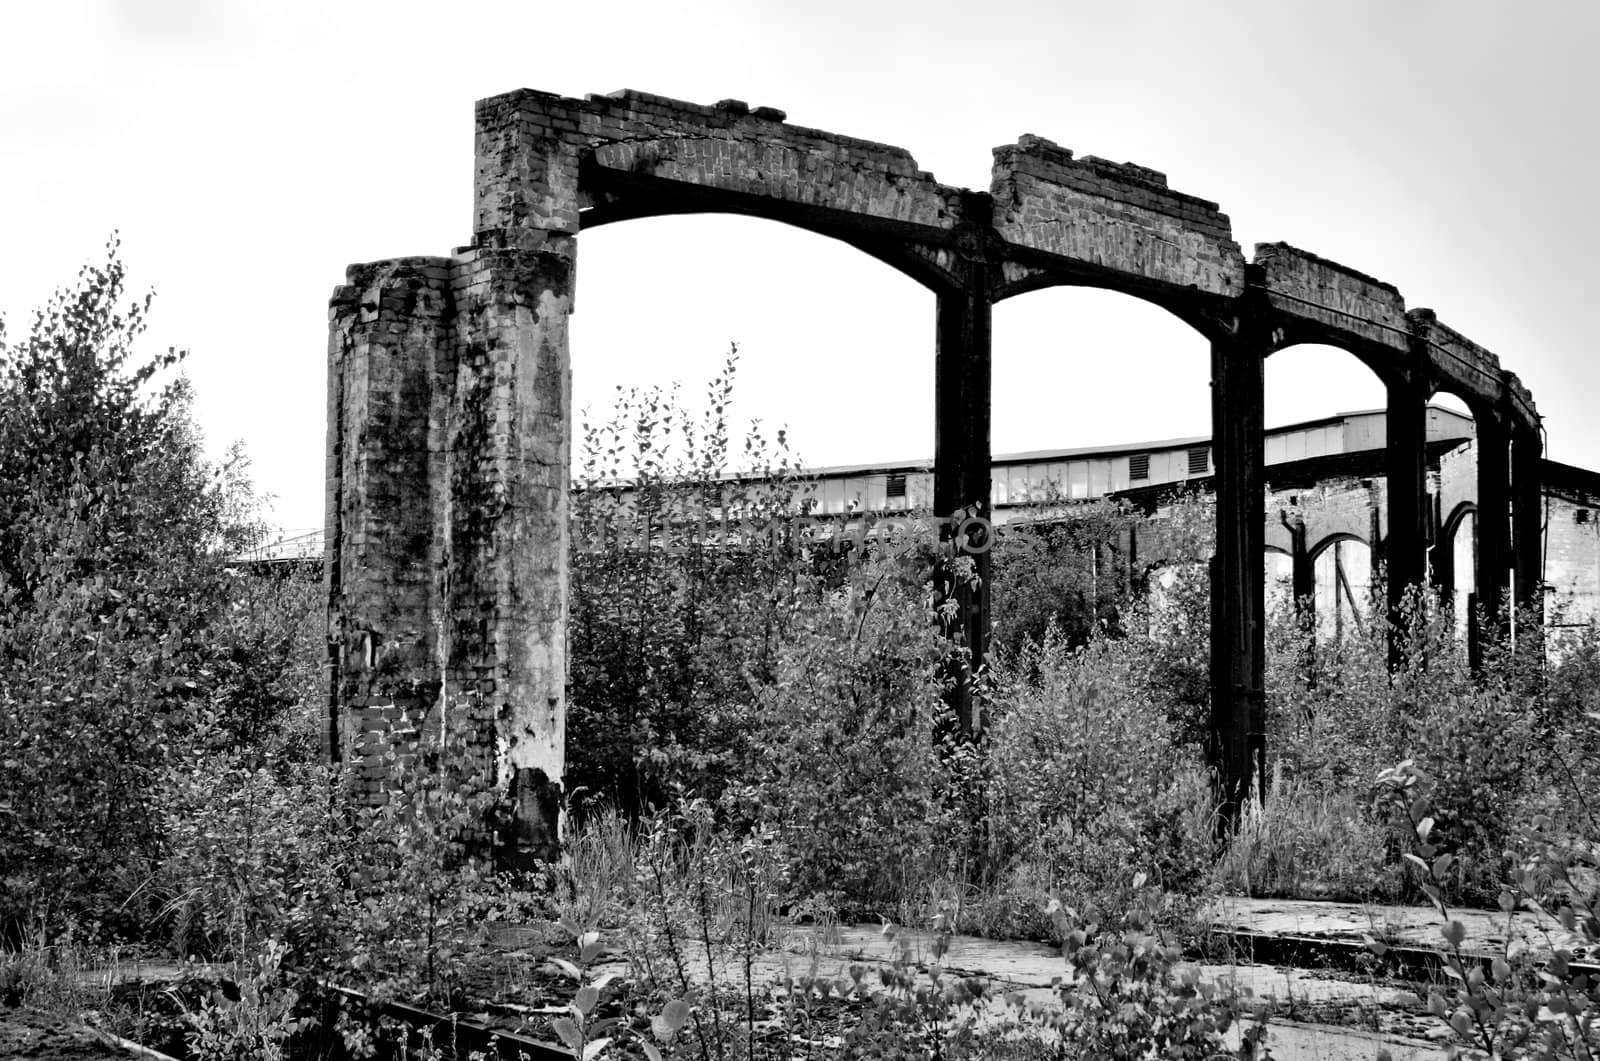 Rotting ruin of an industrial building, the remains of a huge round locomotive shed, which was destroyed by a fire. Totally abandoned area, plants growing everywhere.